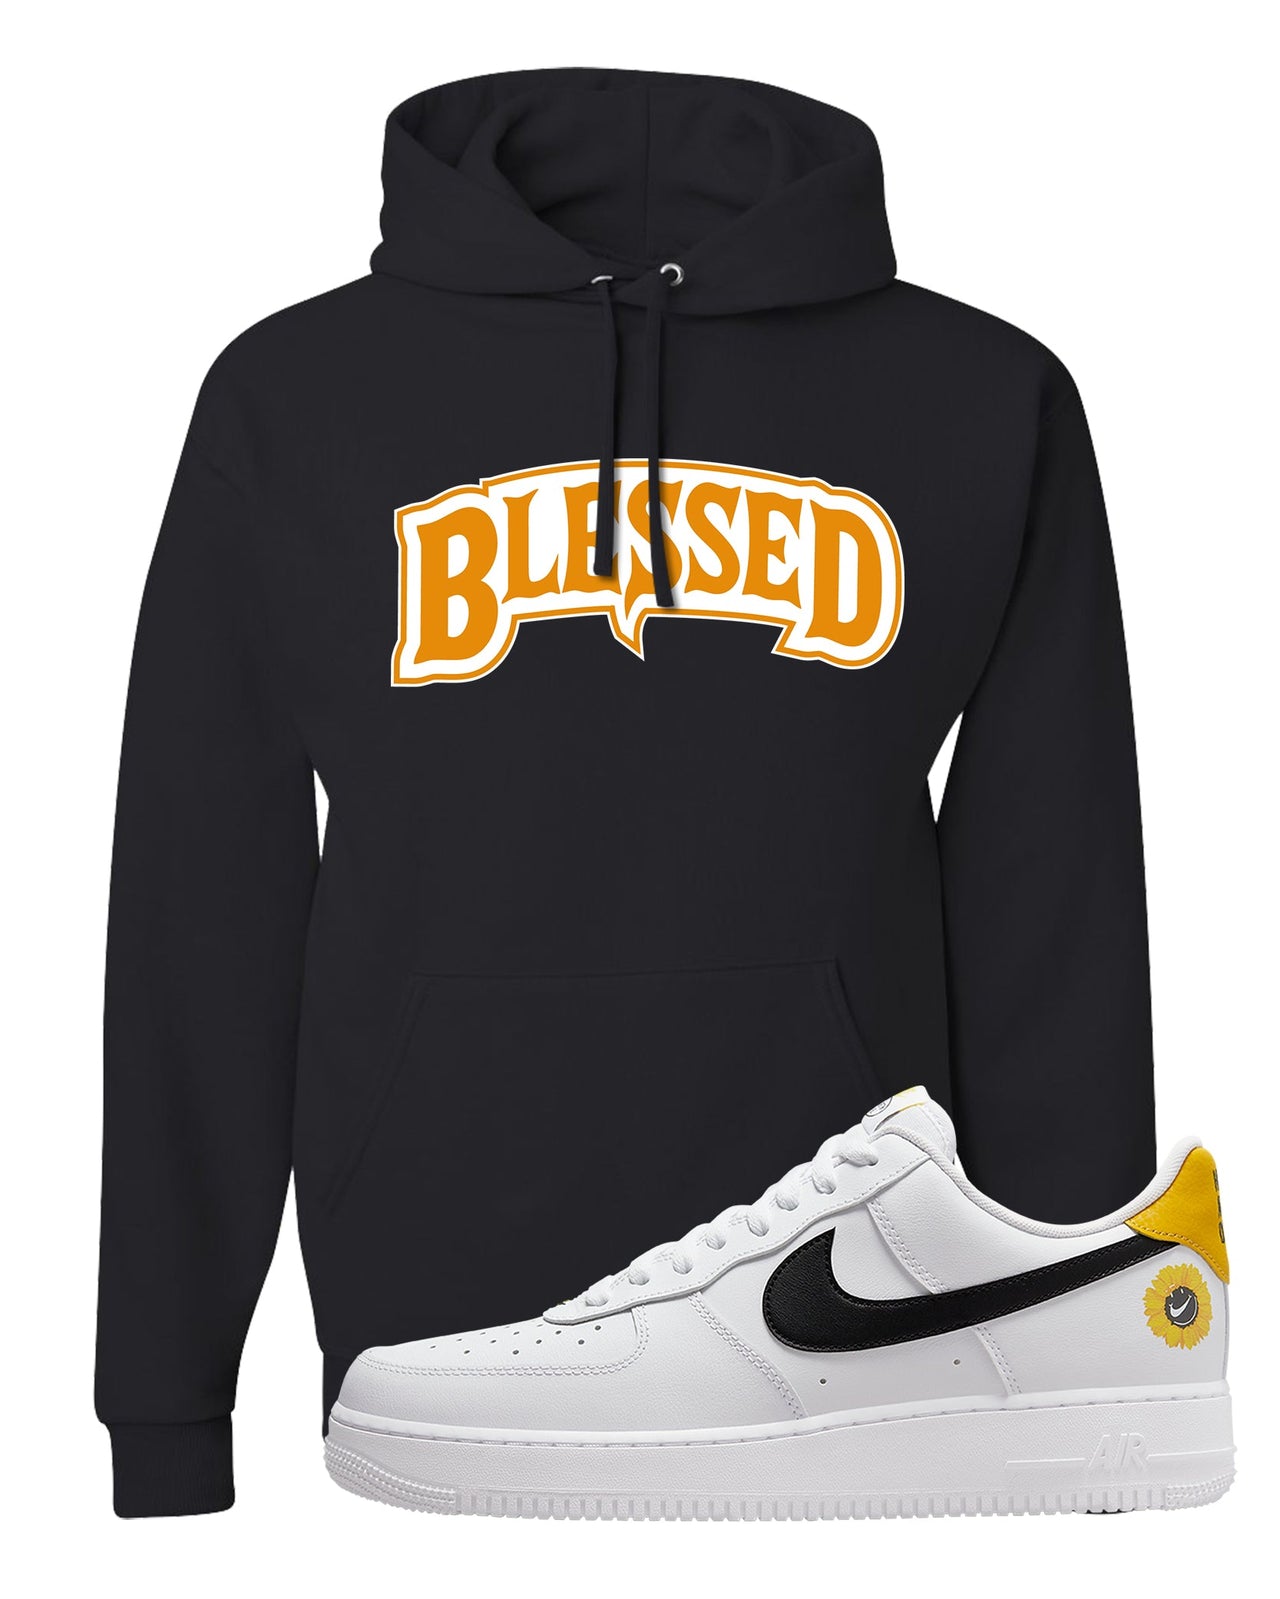 Have A Nice Day AF1s Hoodie | Blessed Arch, Black